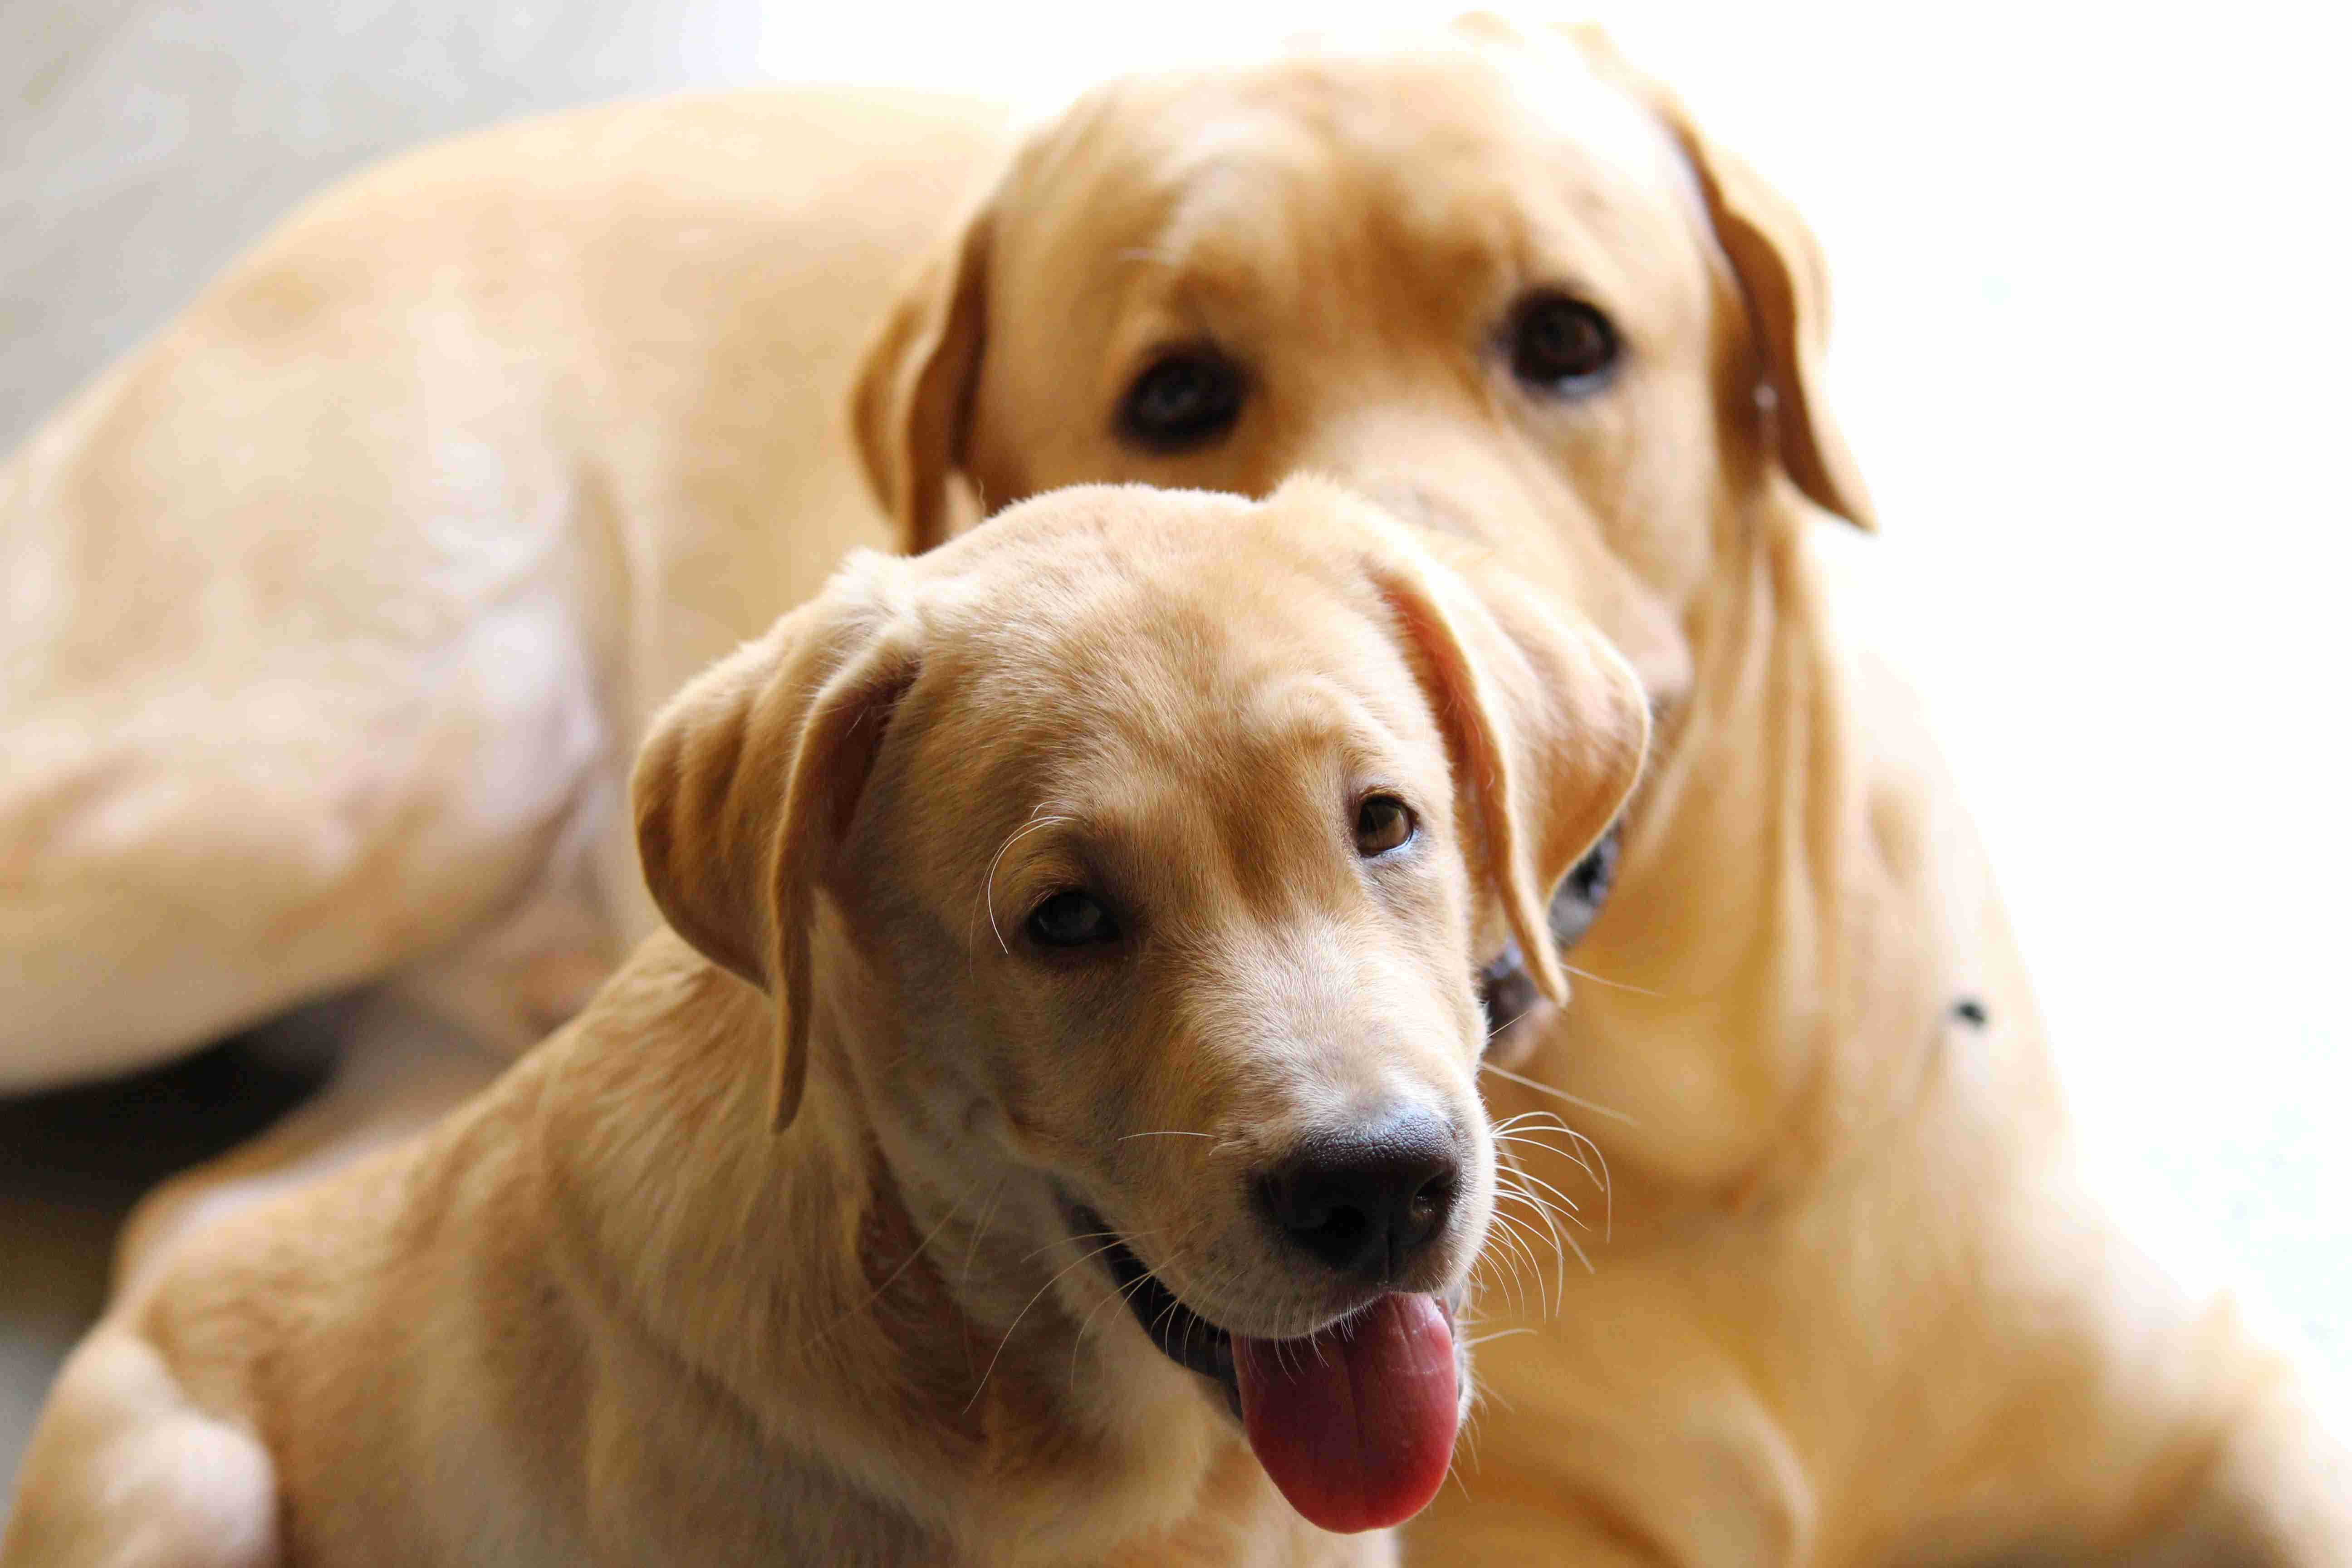 Labrador Retriever Health: A Guide to Identifying and Treating Respiratory Issues